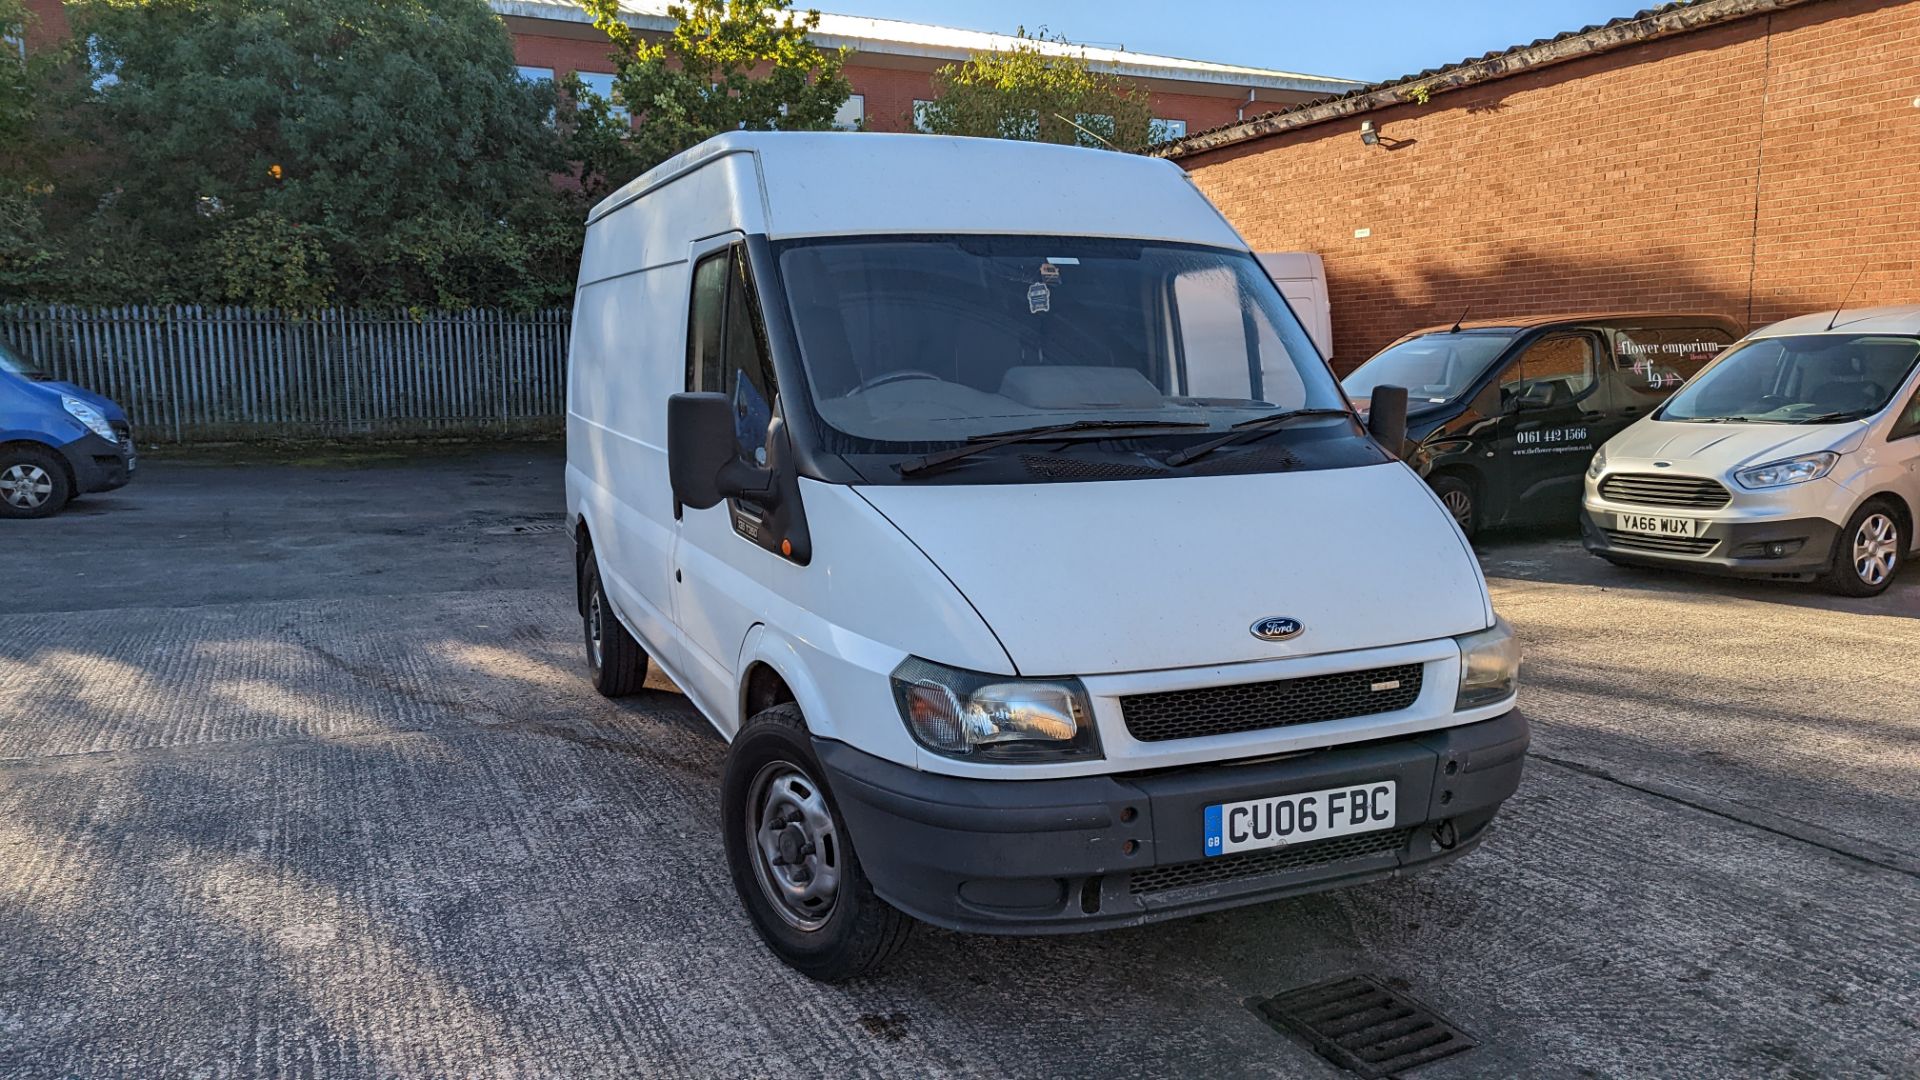 CU06 FBC Ford Transit panel van, 6 speed manual gearbox, 2402cc diesel engine. Colour: white. Fir - Image 44 of 44